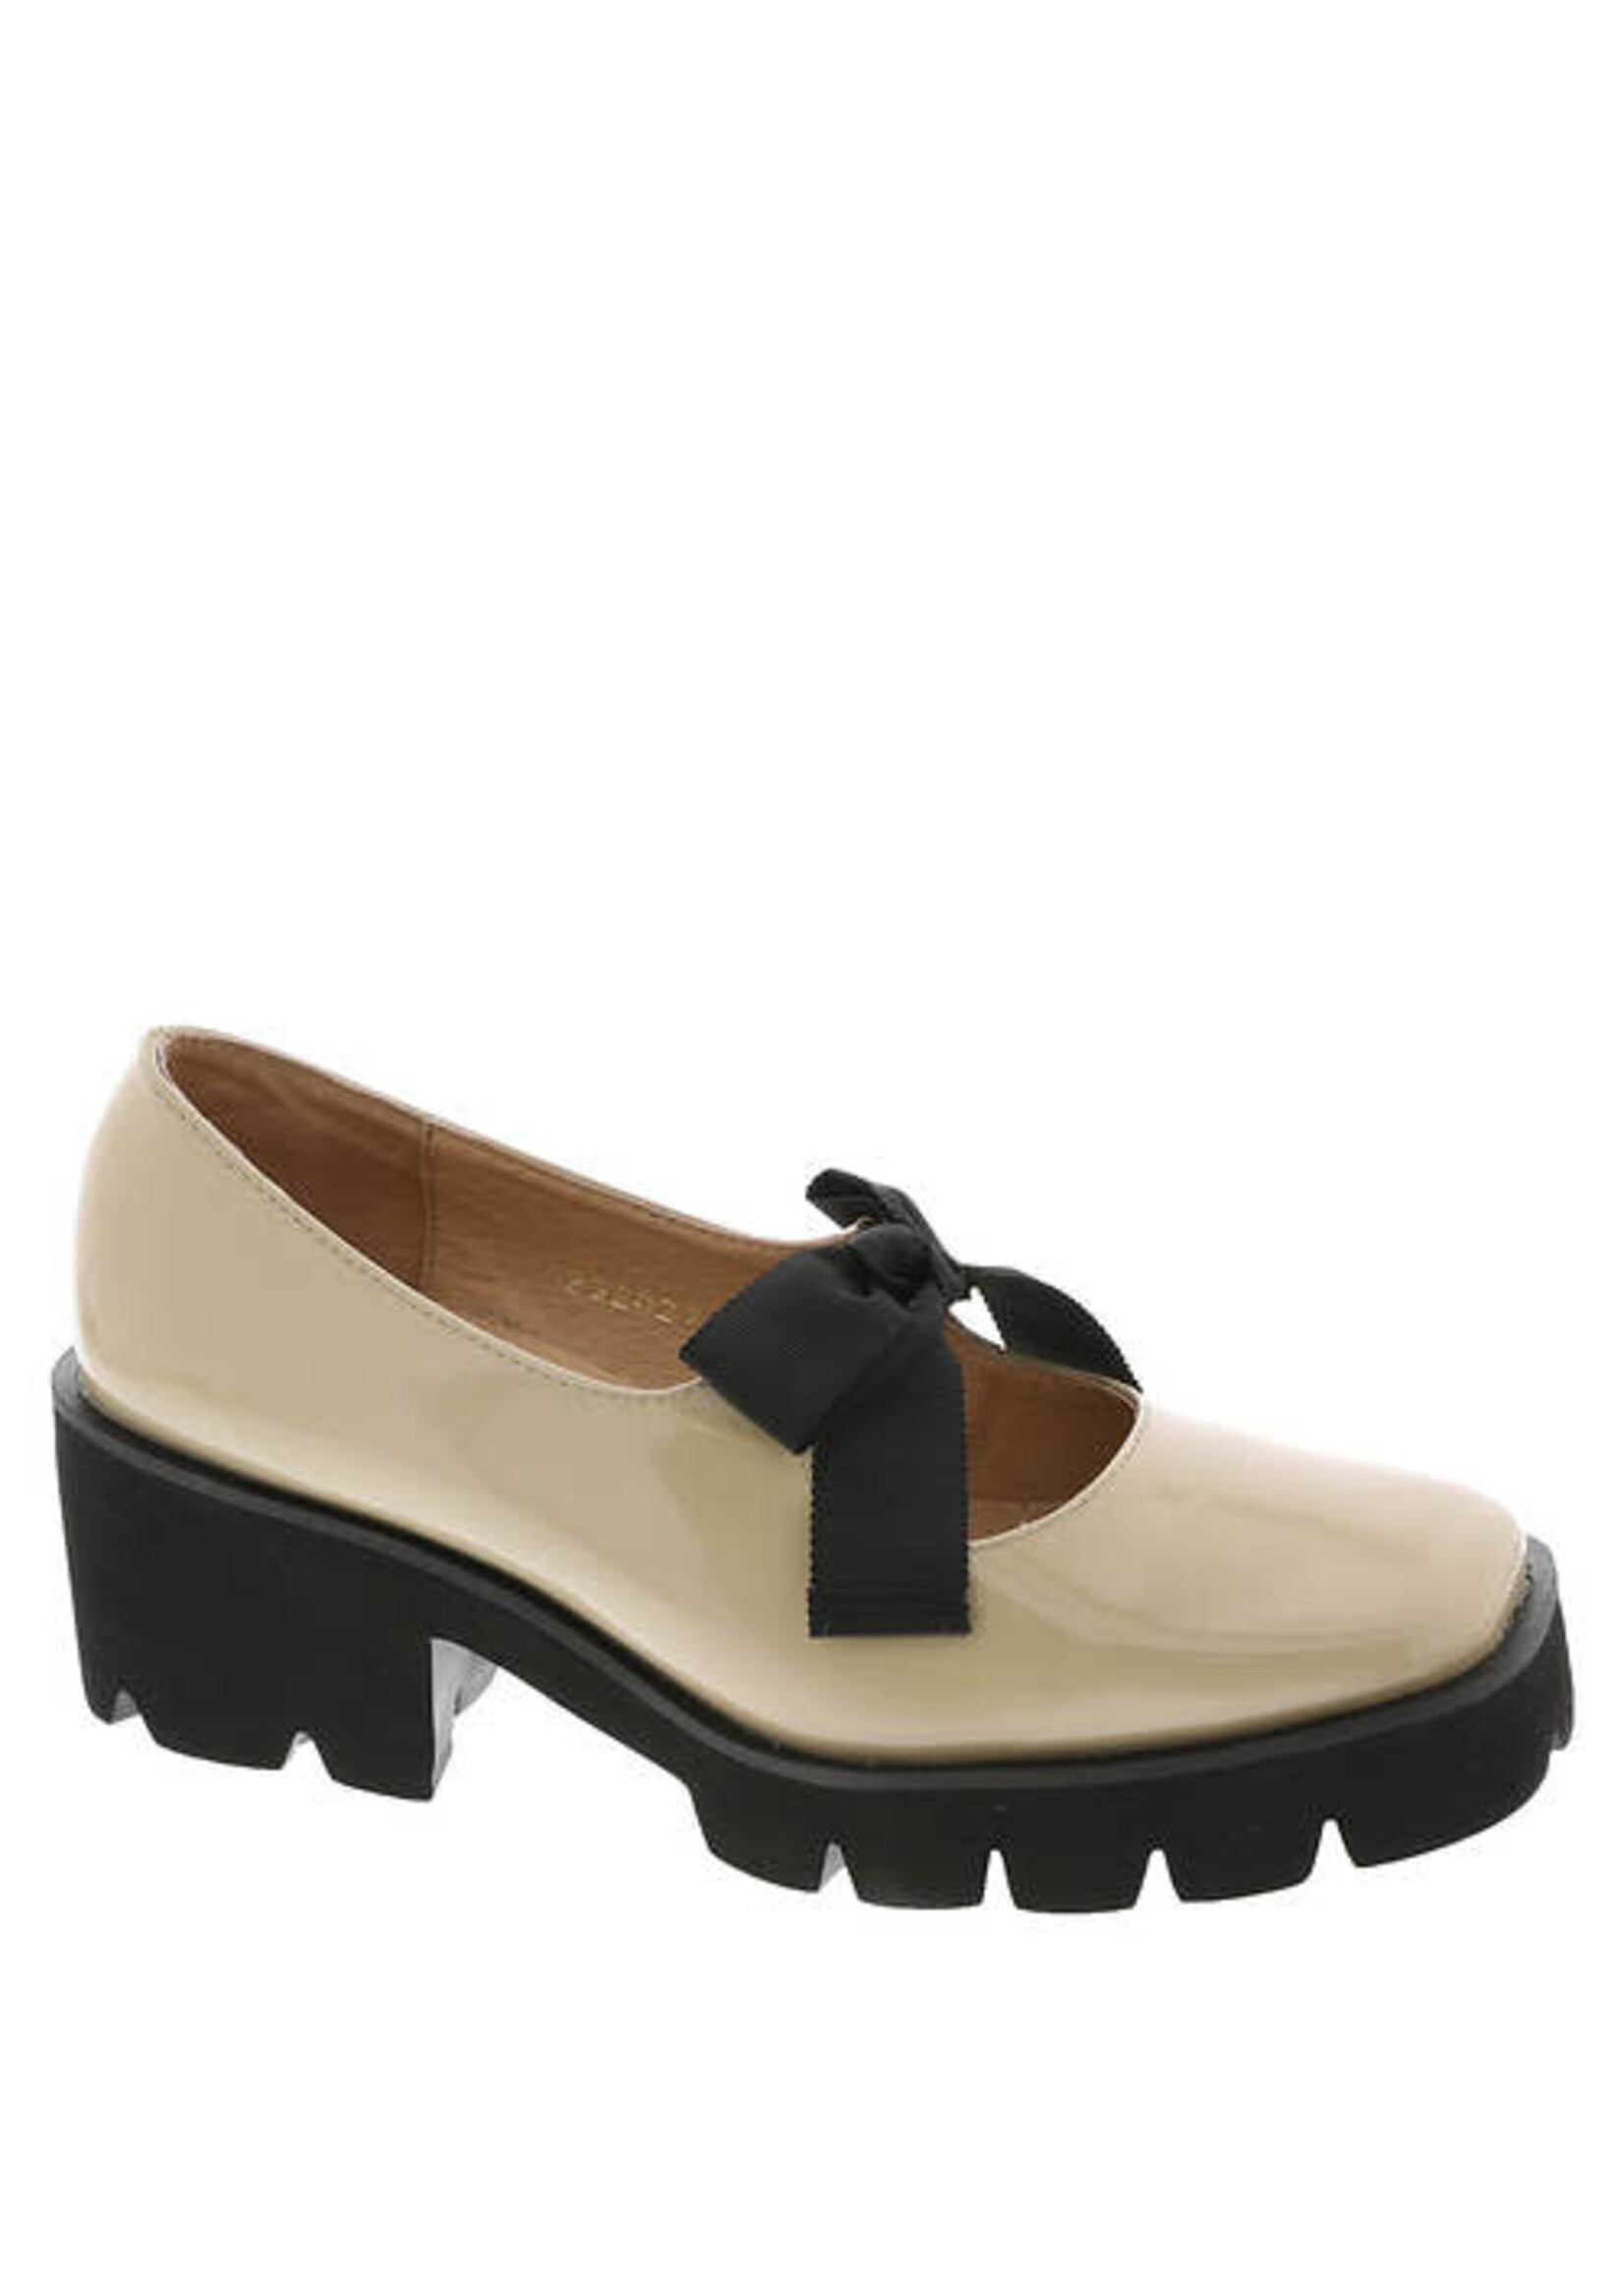 ALL BLACK Tap and Lug in Beige Patent Leather by ALL BLACK  Footwear  25% Off